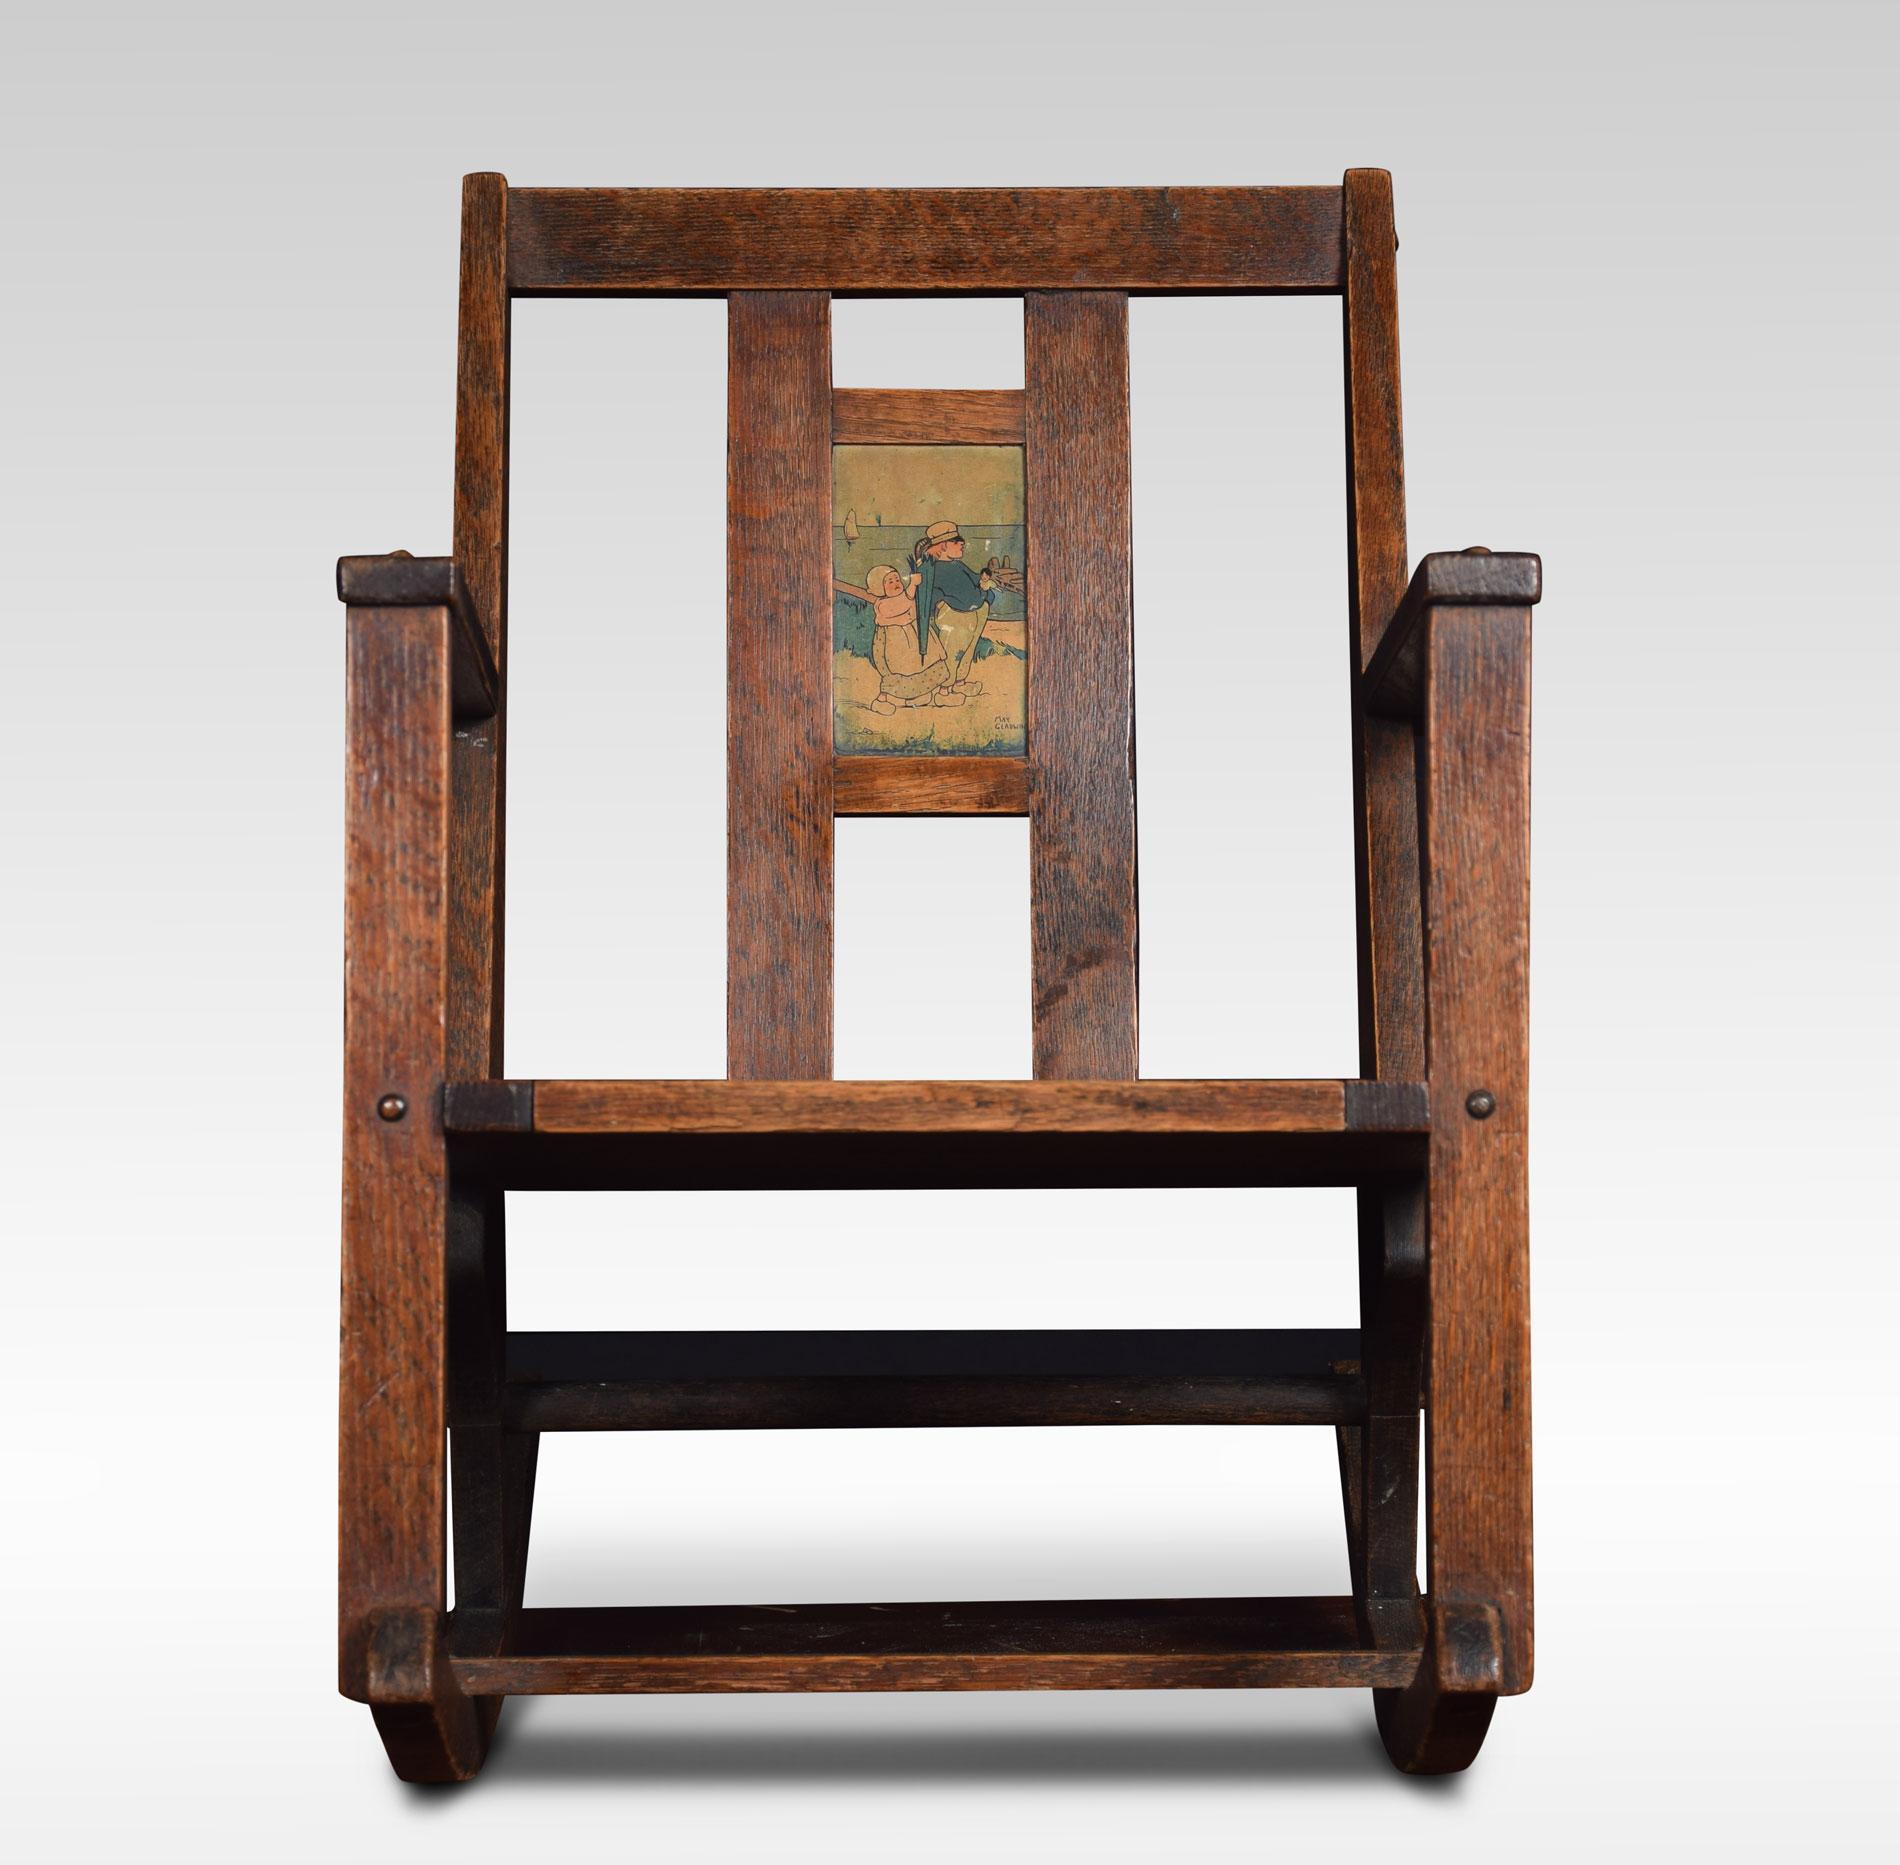 Childs rocking chair of Arts & Crafts designing the stylised back with central cartoon painting by May Gladwin. To the solid oak seat raised up on square supports resting on curved rockers.
Dimensions:
Height 25 inches height to seat 9.5